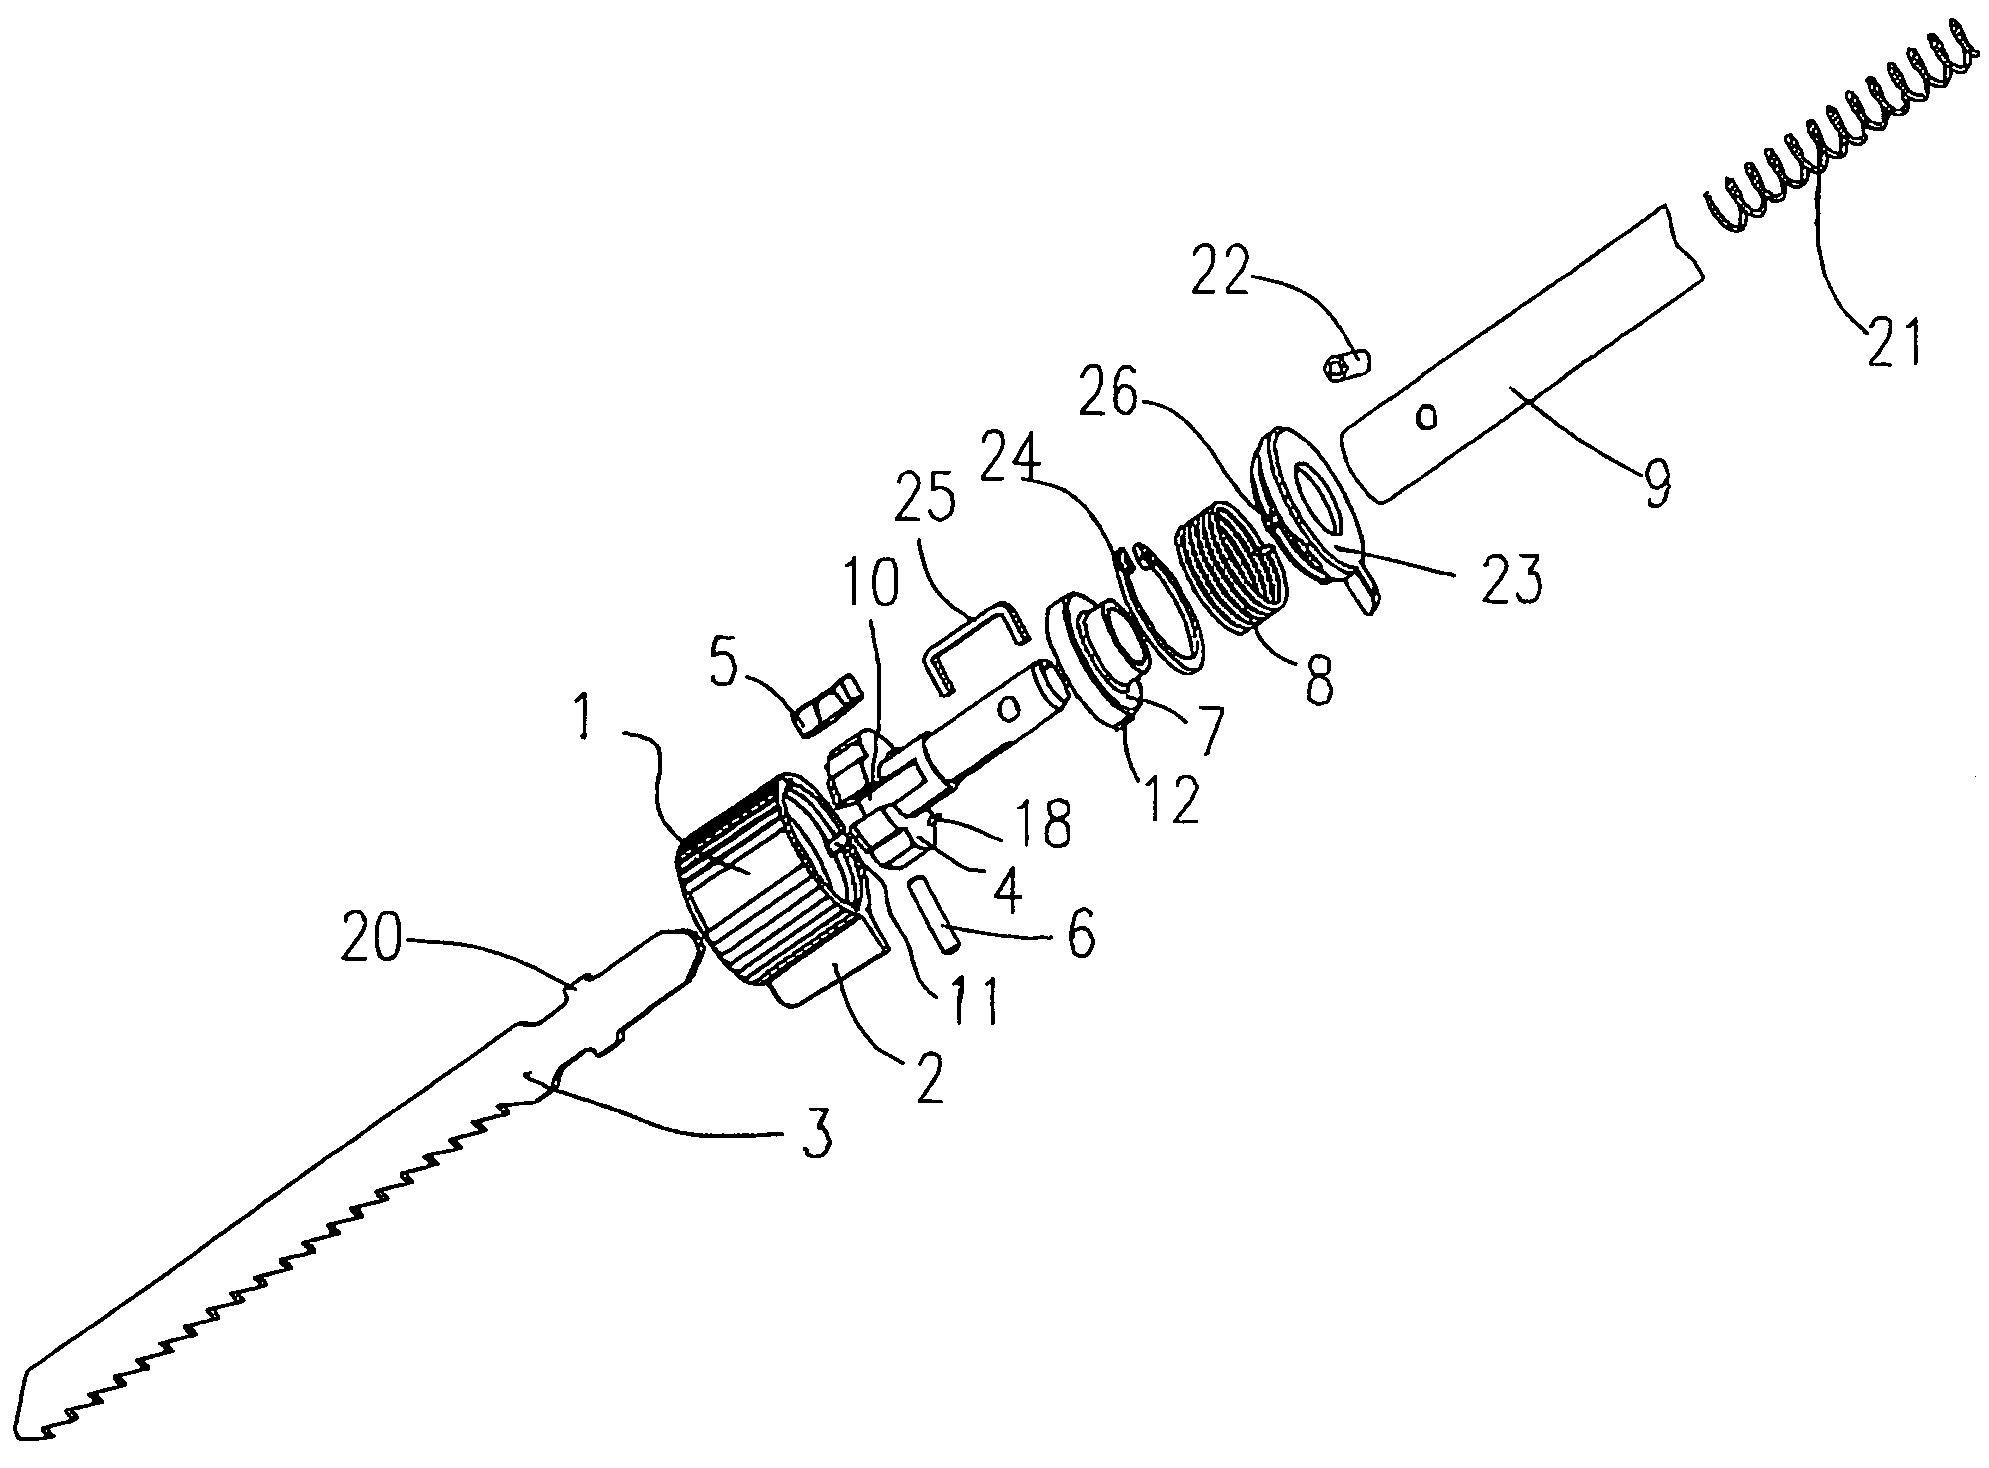 Blade clamping device